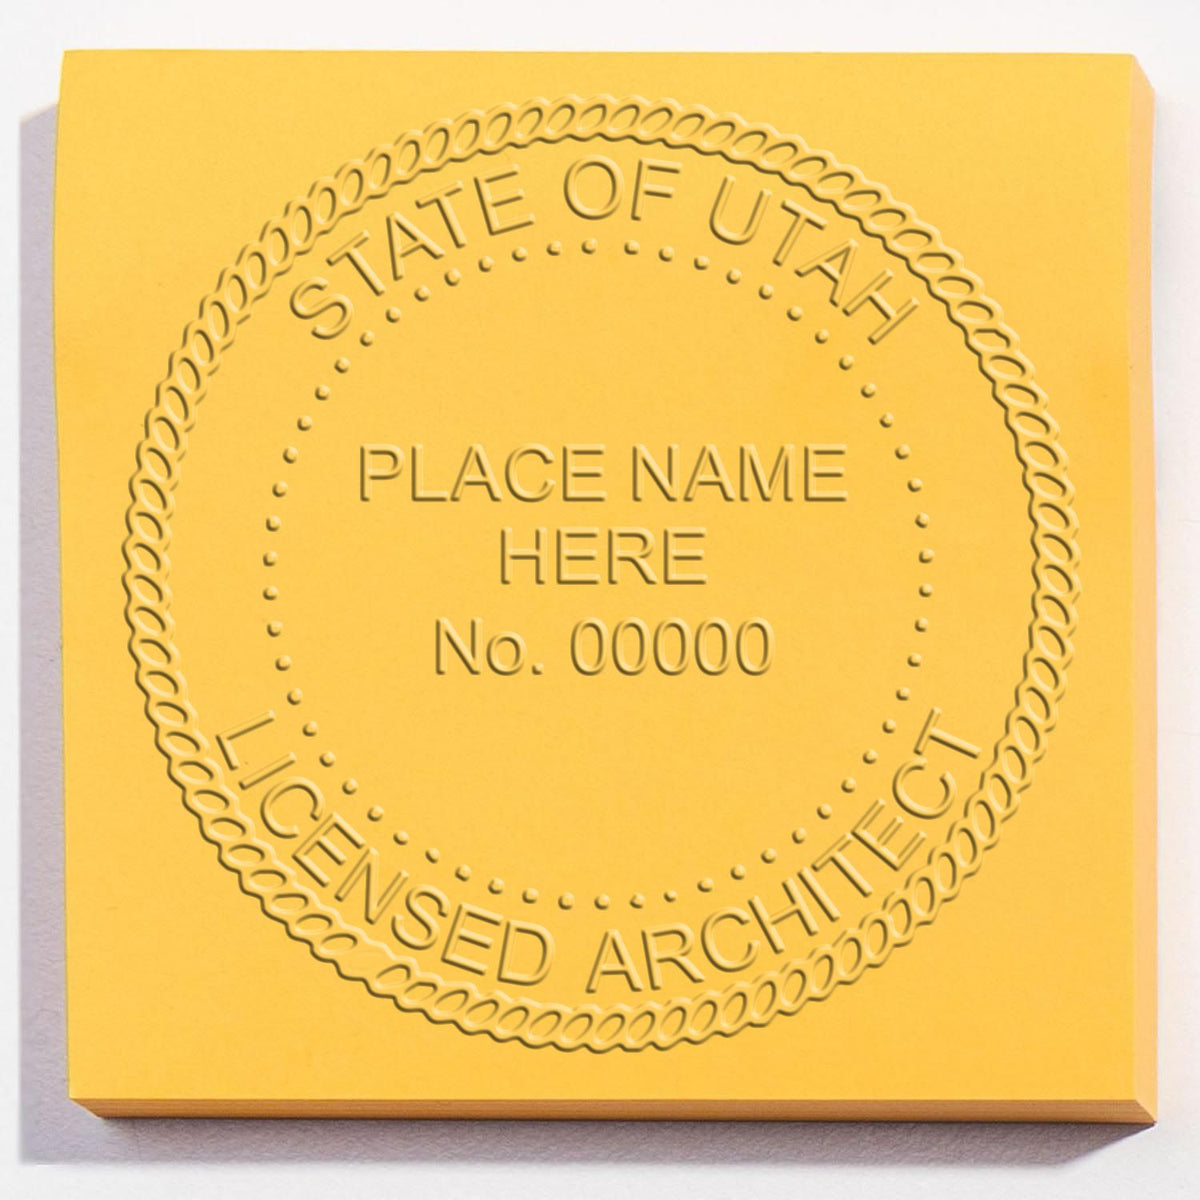 The State of Utah Long Reach Architectural Embossing Seal stamp impression comes to life with a crisp, detailed photo on paper - showcasing true professional quality.